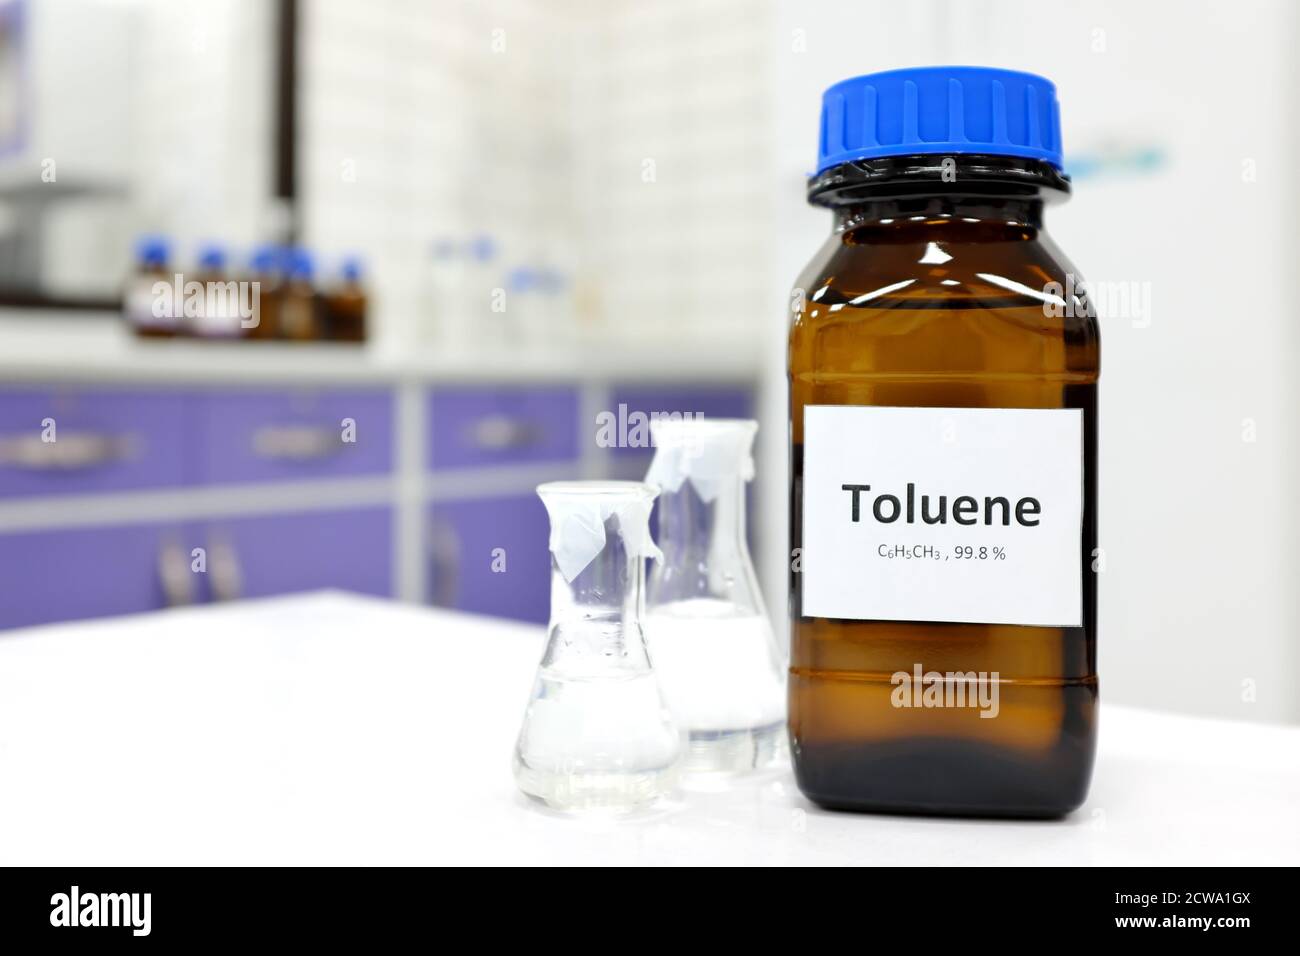 Selective focus of toluene liquid chemical compound in dark glass bottle inside a chemistry laboratory with copy space. Aromatic hydrocarbon used in petrochemical industry. Stock Photo